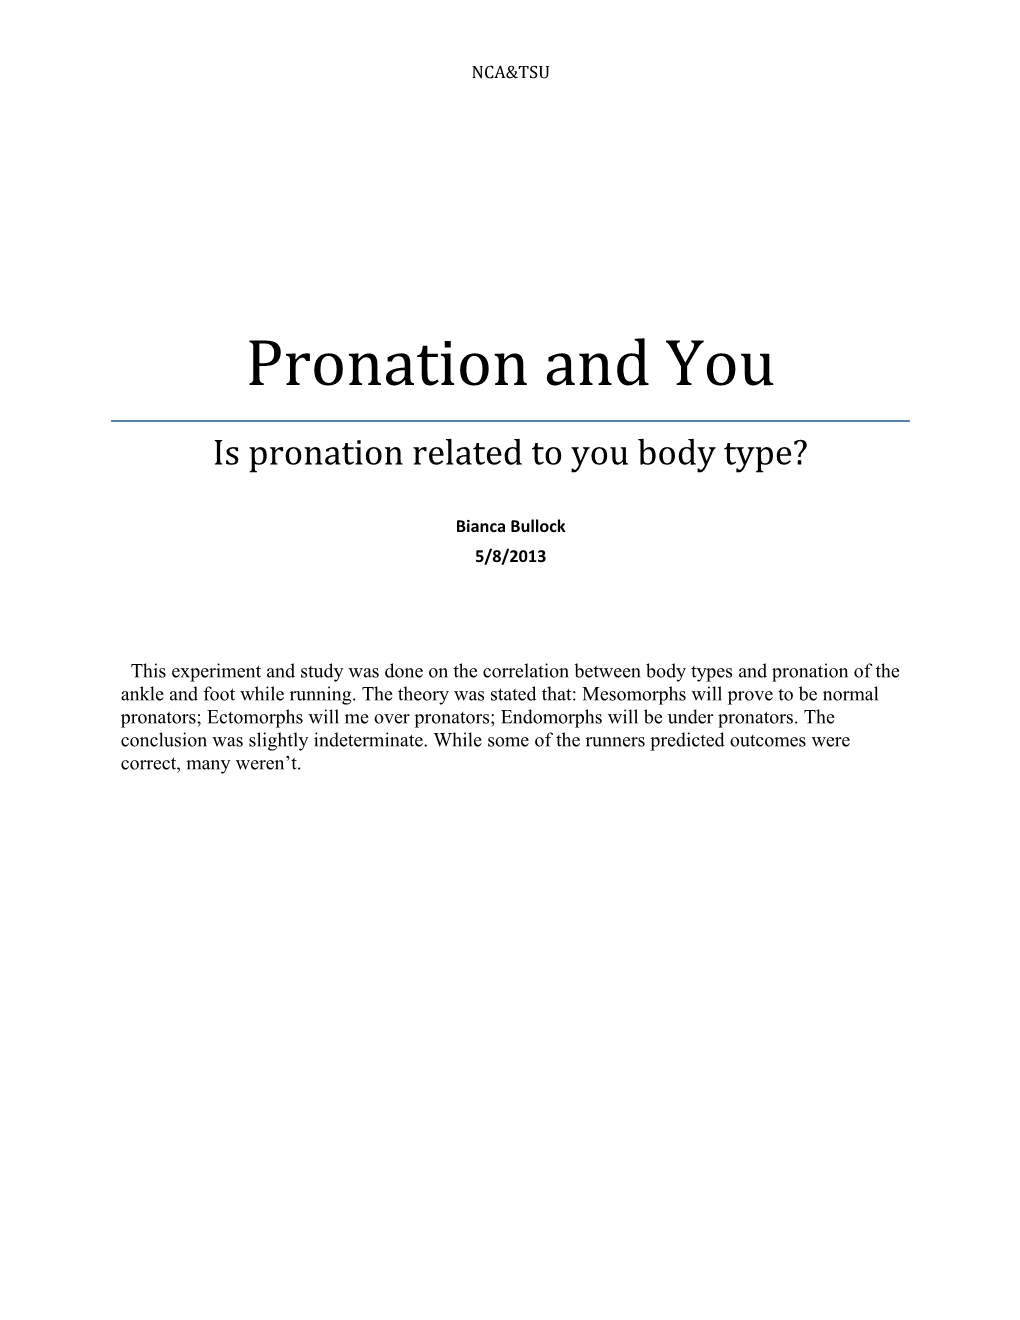 Pronation and You